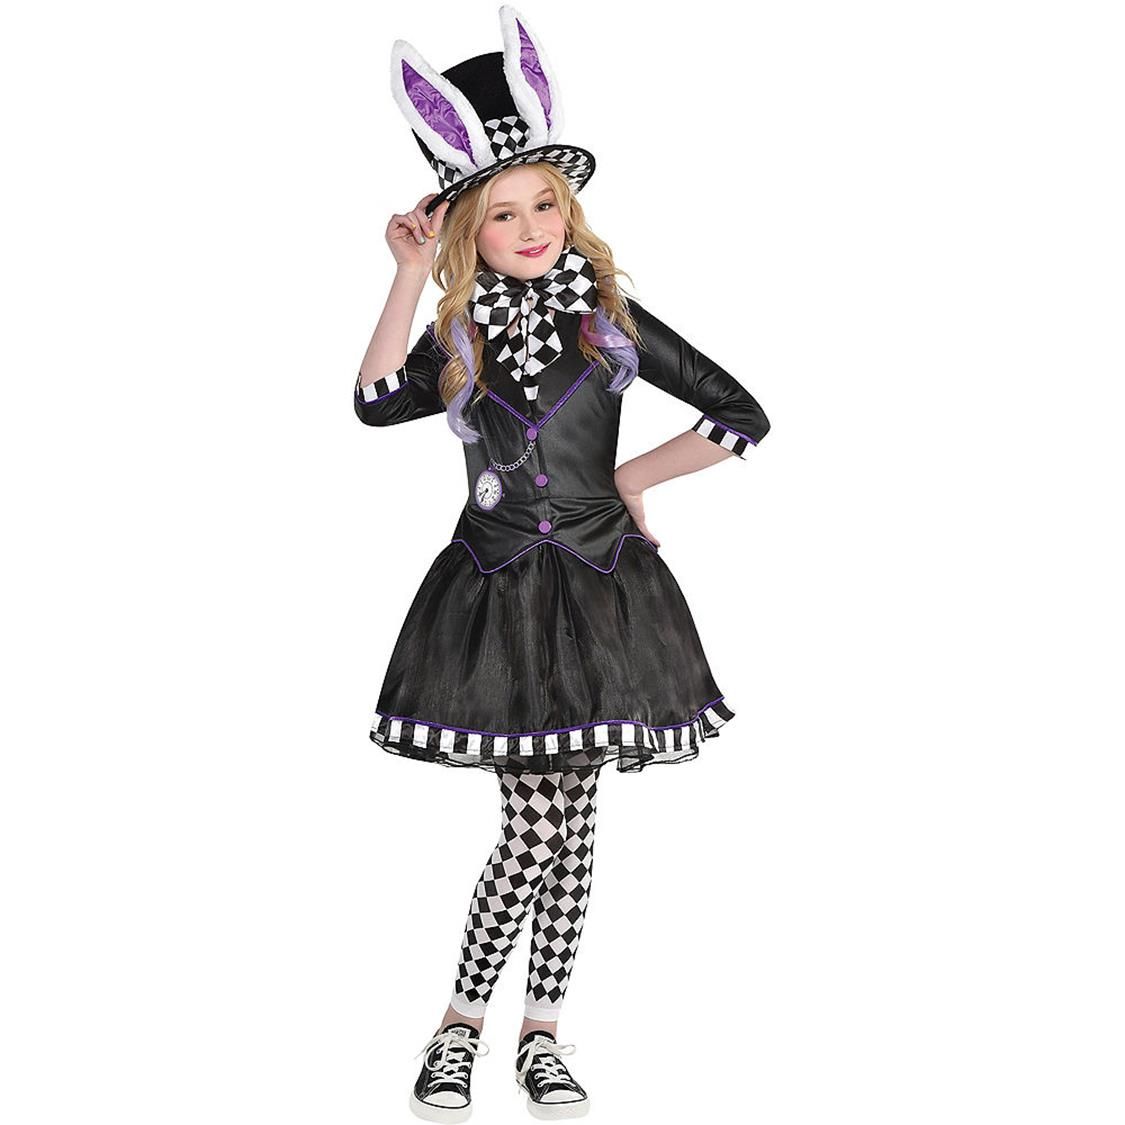 Kids' Punky Jester Black/White Outfit with Shirt/Skirt/Leggings